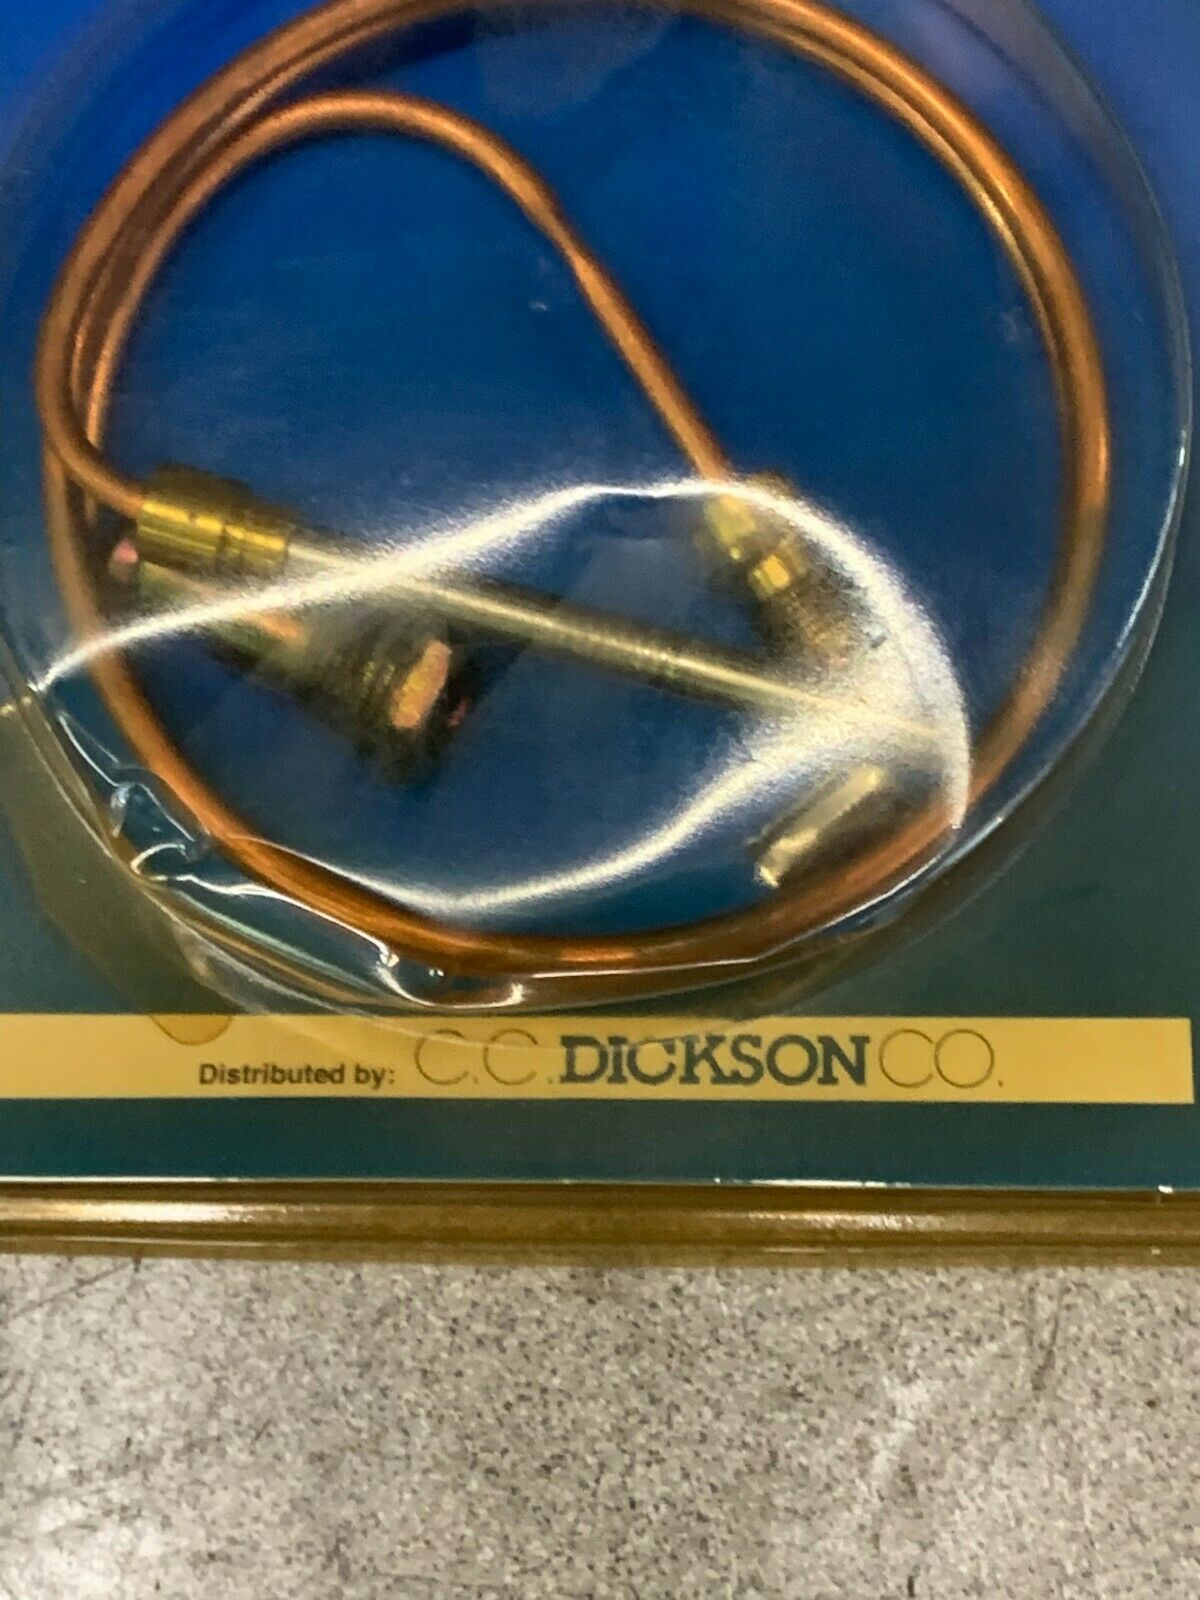 NEW IN BOX DICO DT-36 THERMOCOUPLE DT-36"